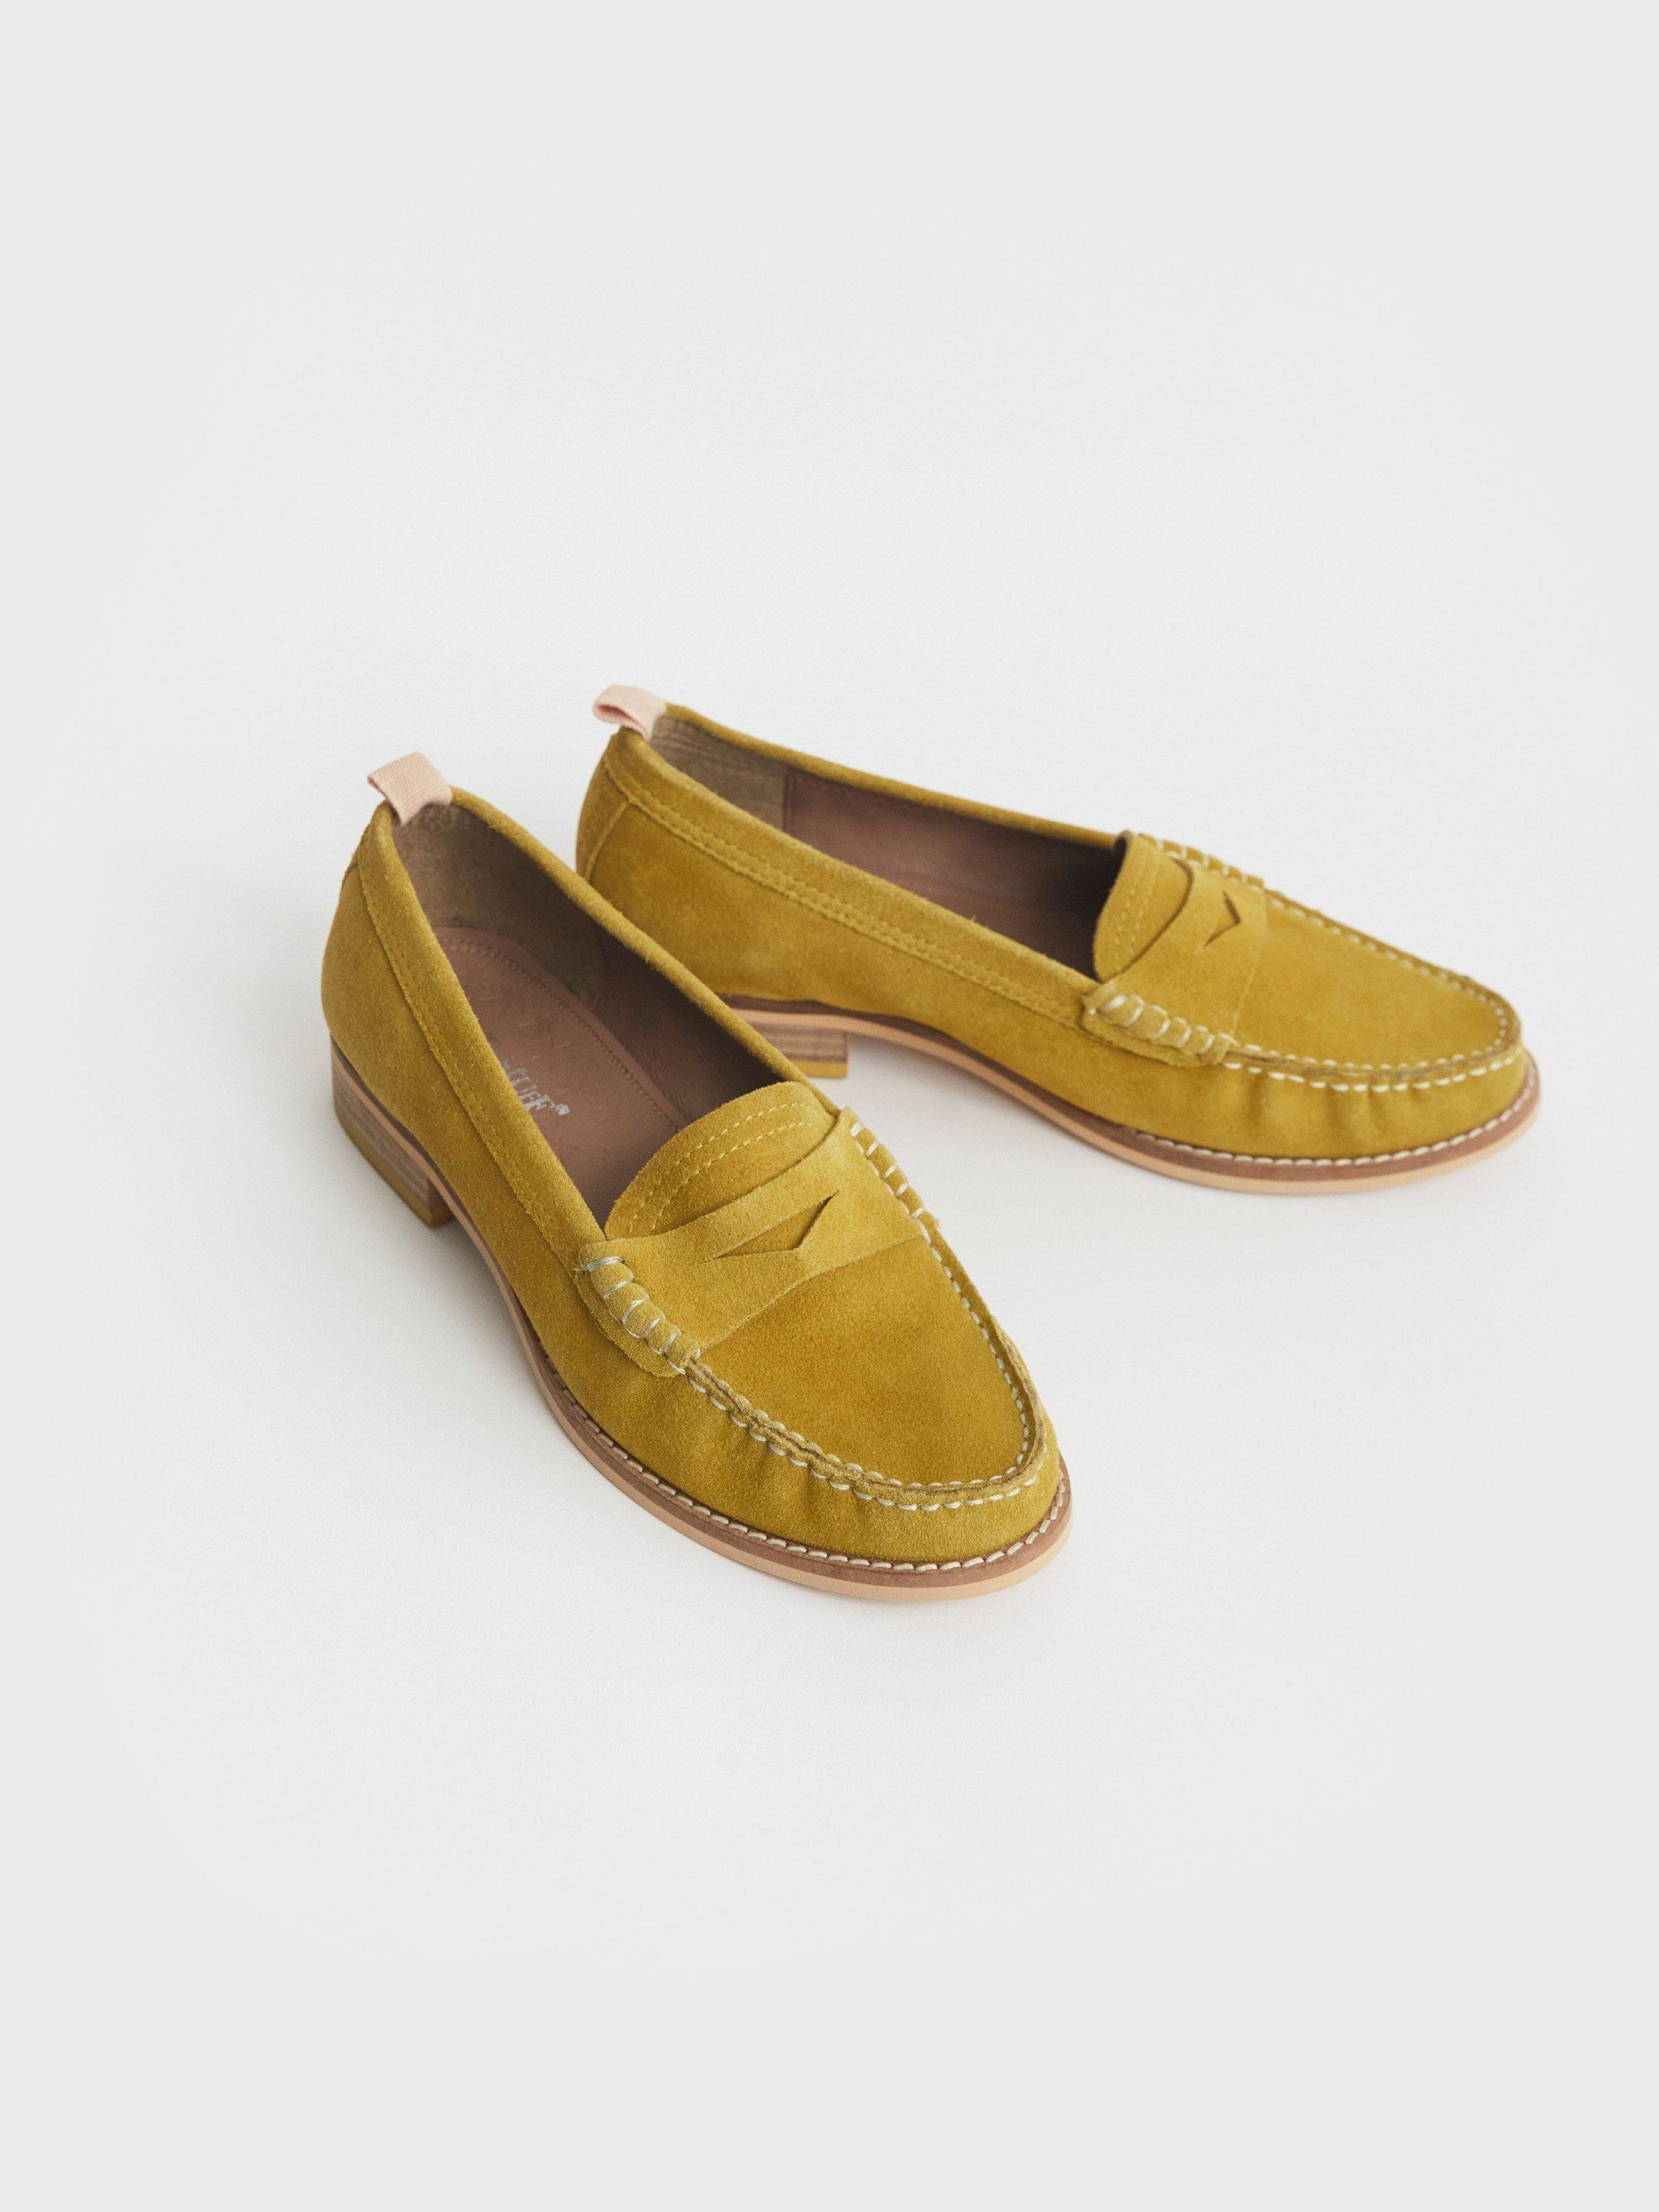 Eden Loafer in MID CHART - FLAT FRONT